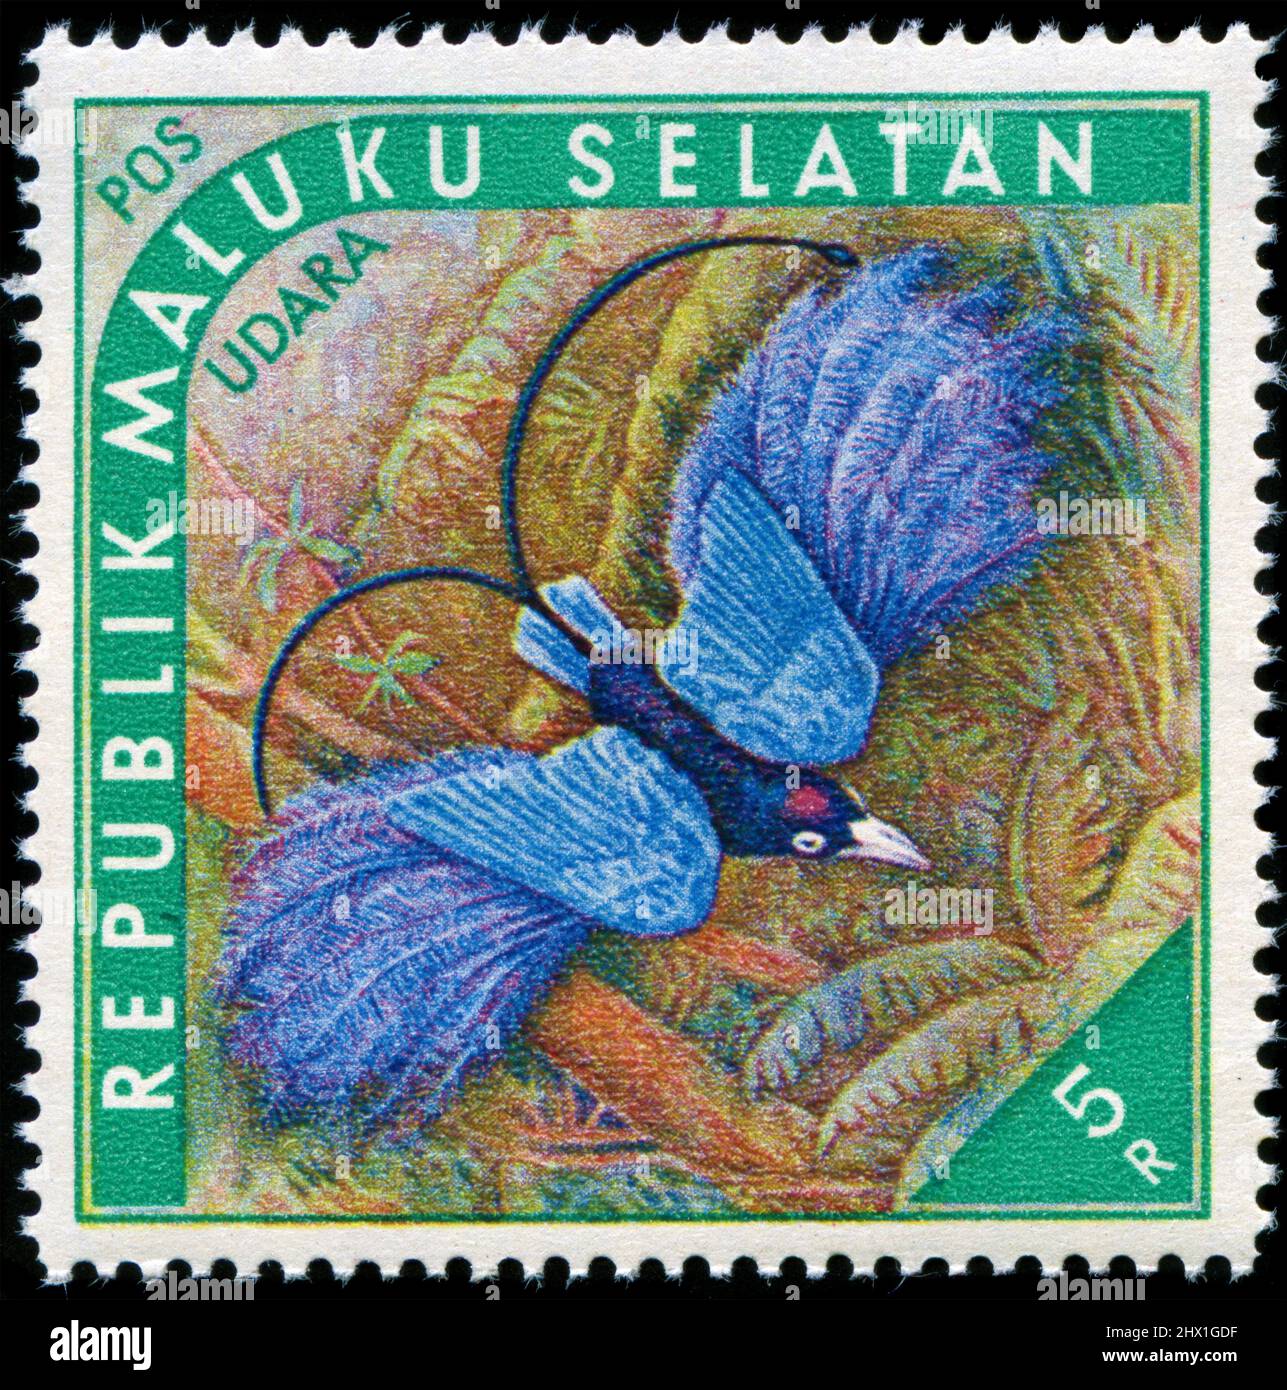 Cinderella stamp in the Maluku Selatan series issued in 1952. POS POSTAGE - This is a private issue with a fictitious currency Stock Photo